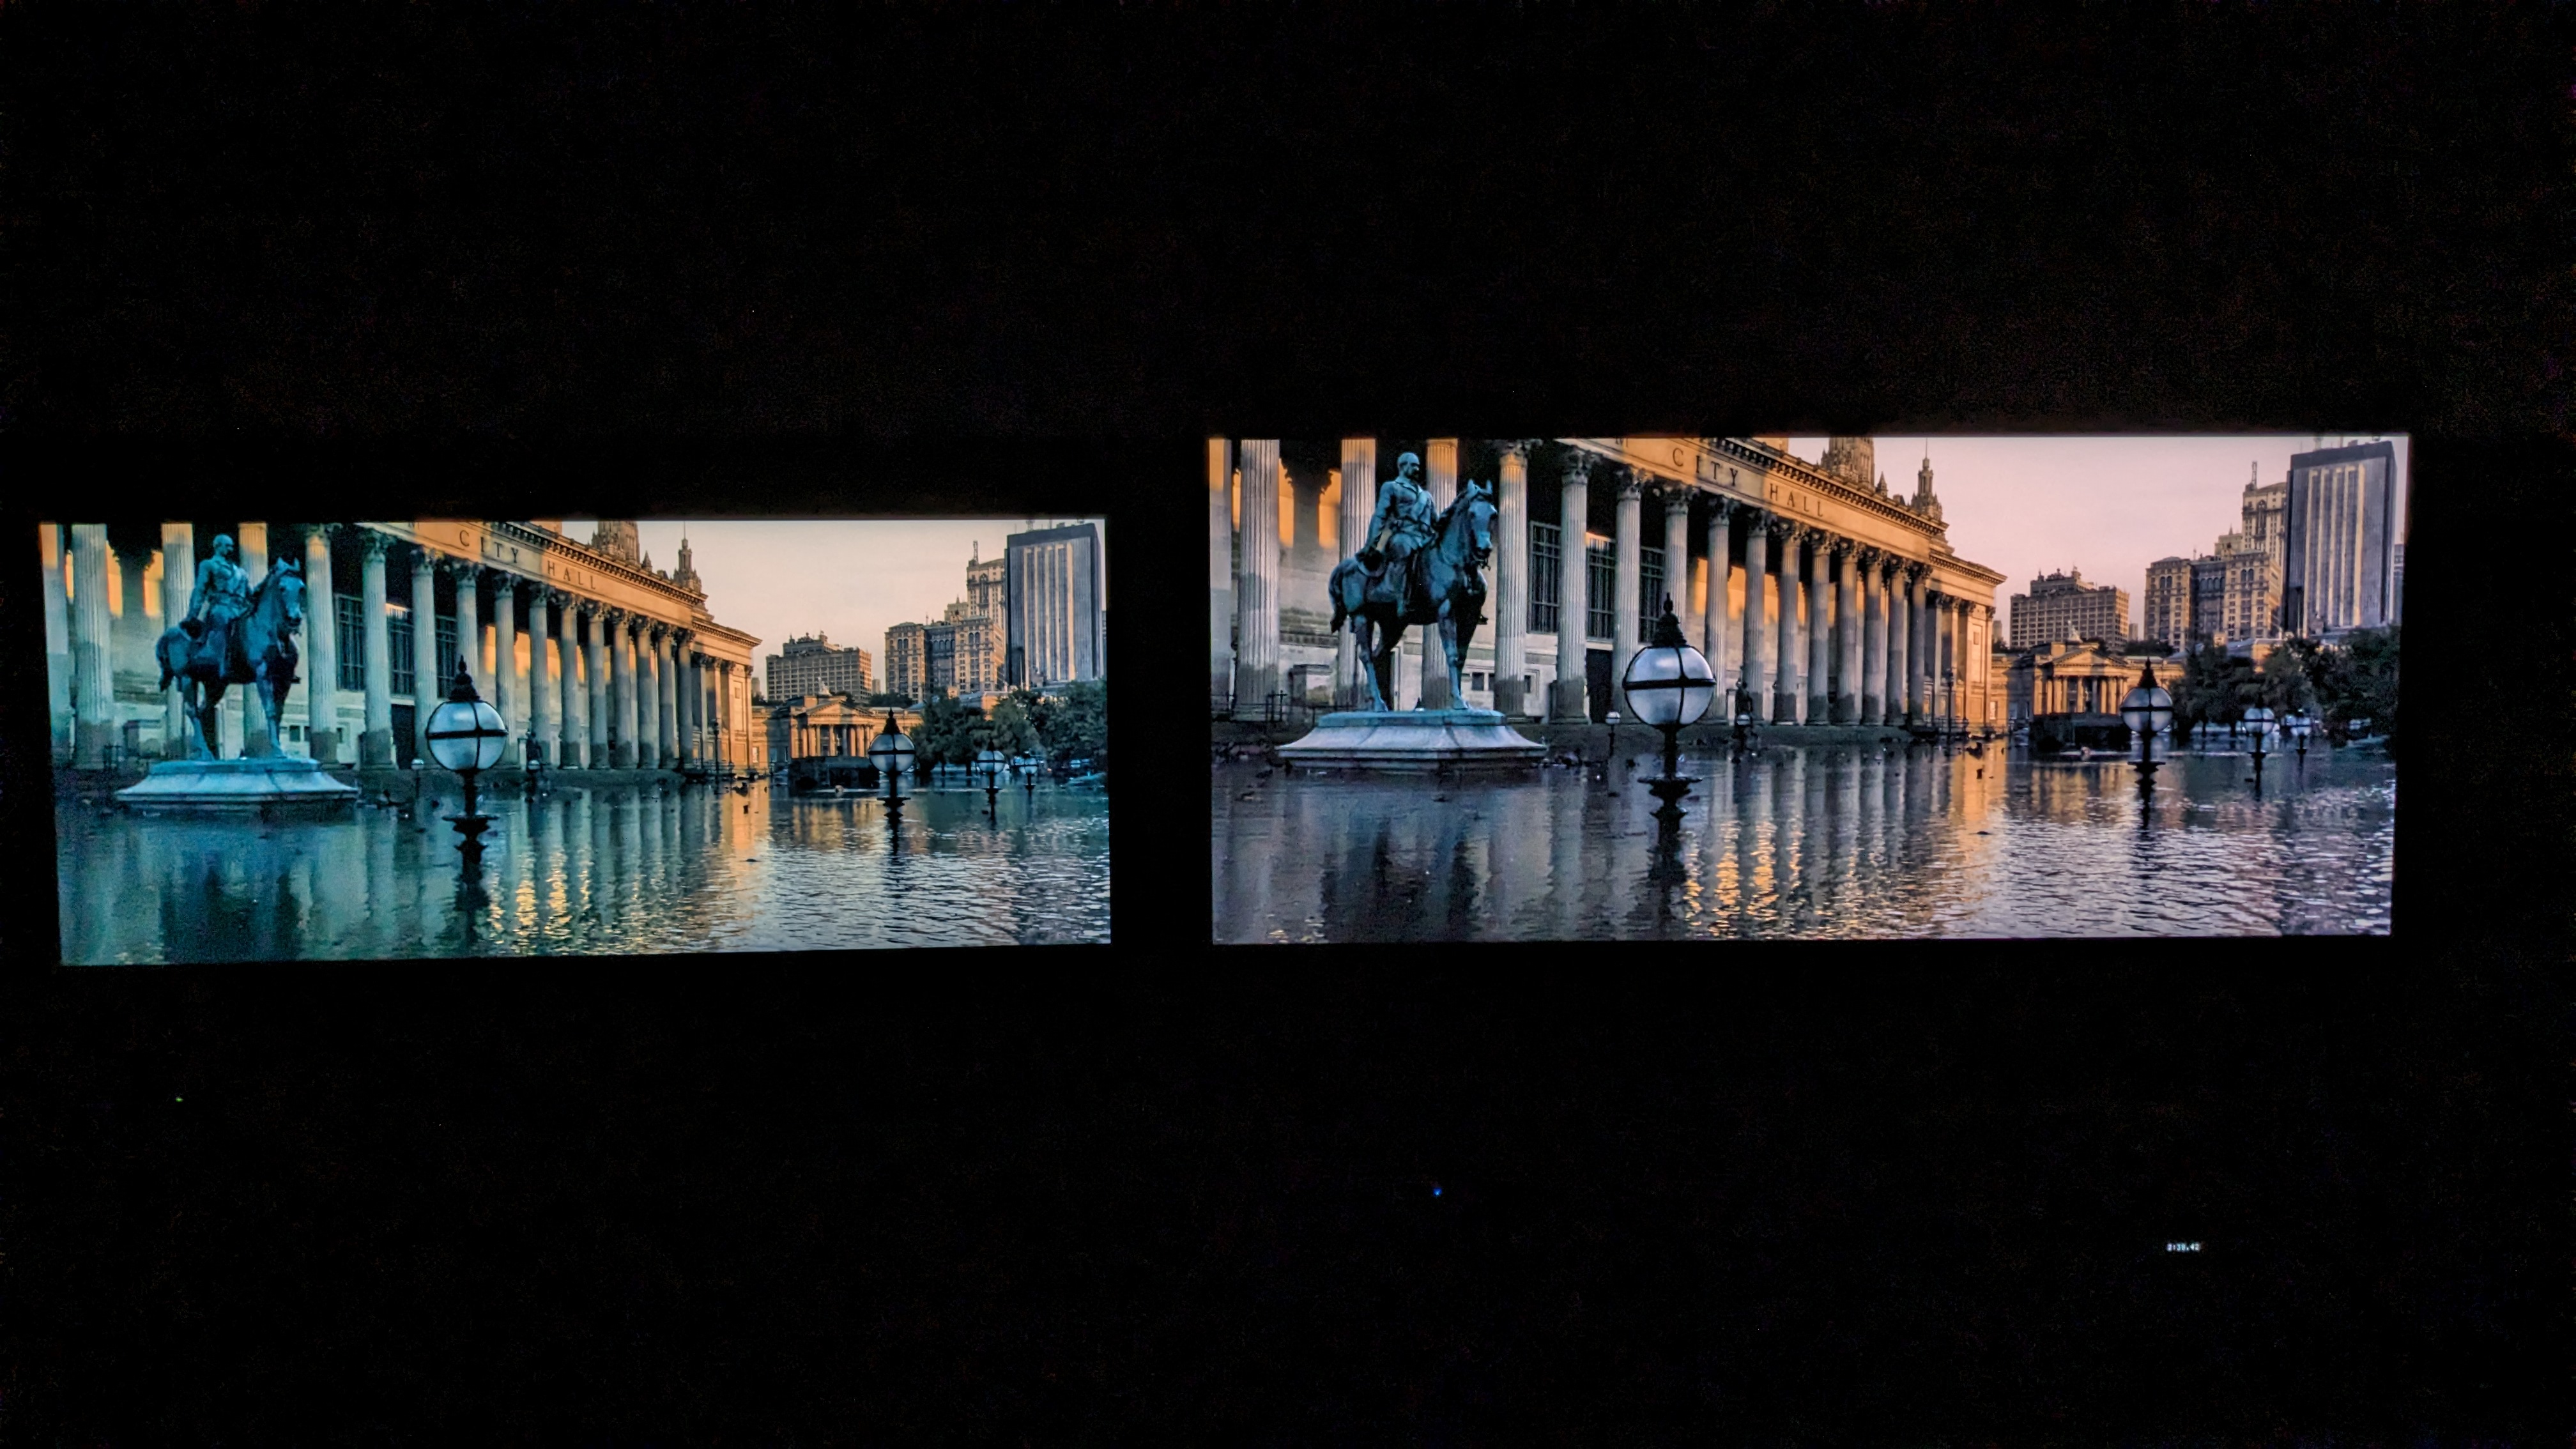 Samsung S95C and Panasonic MZ1500 in dark conditions with the batman on screen